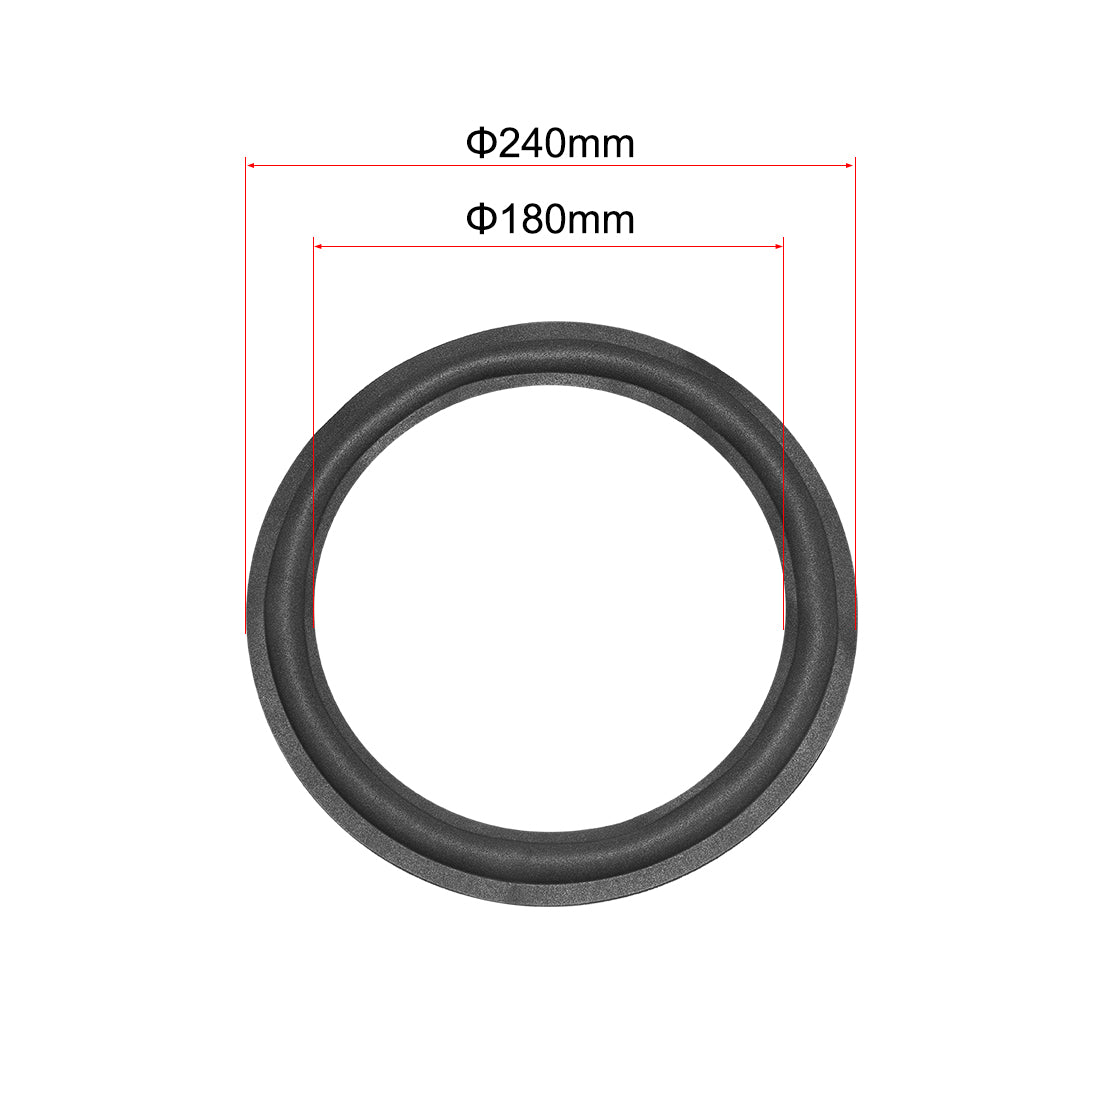 uxcell Uxcell 10 Inch Speaker Foam Edge Surround Rings Replacement Parts for Speaker Repair or DIY 4pcs